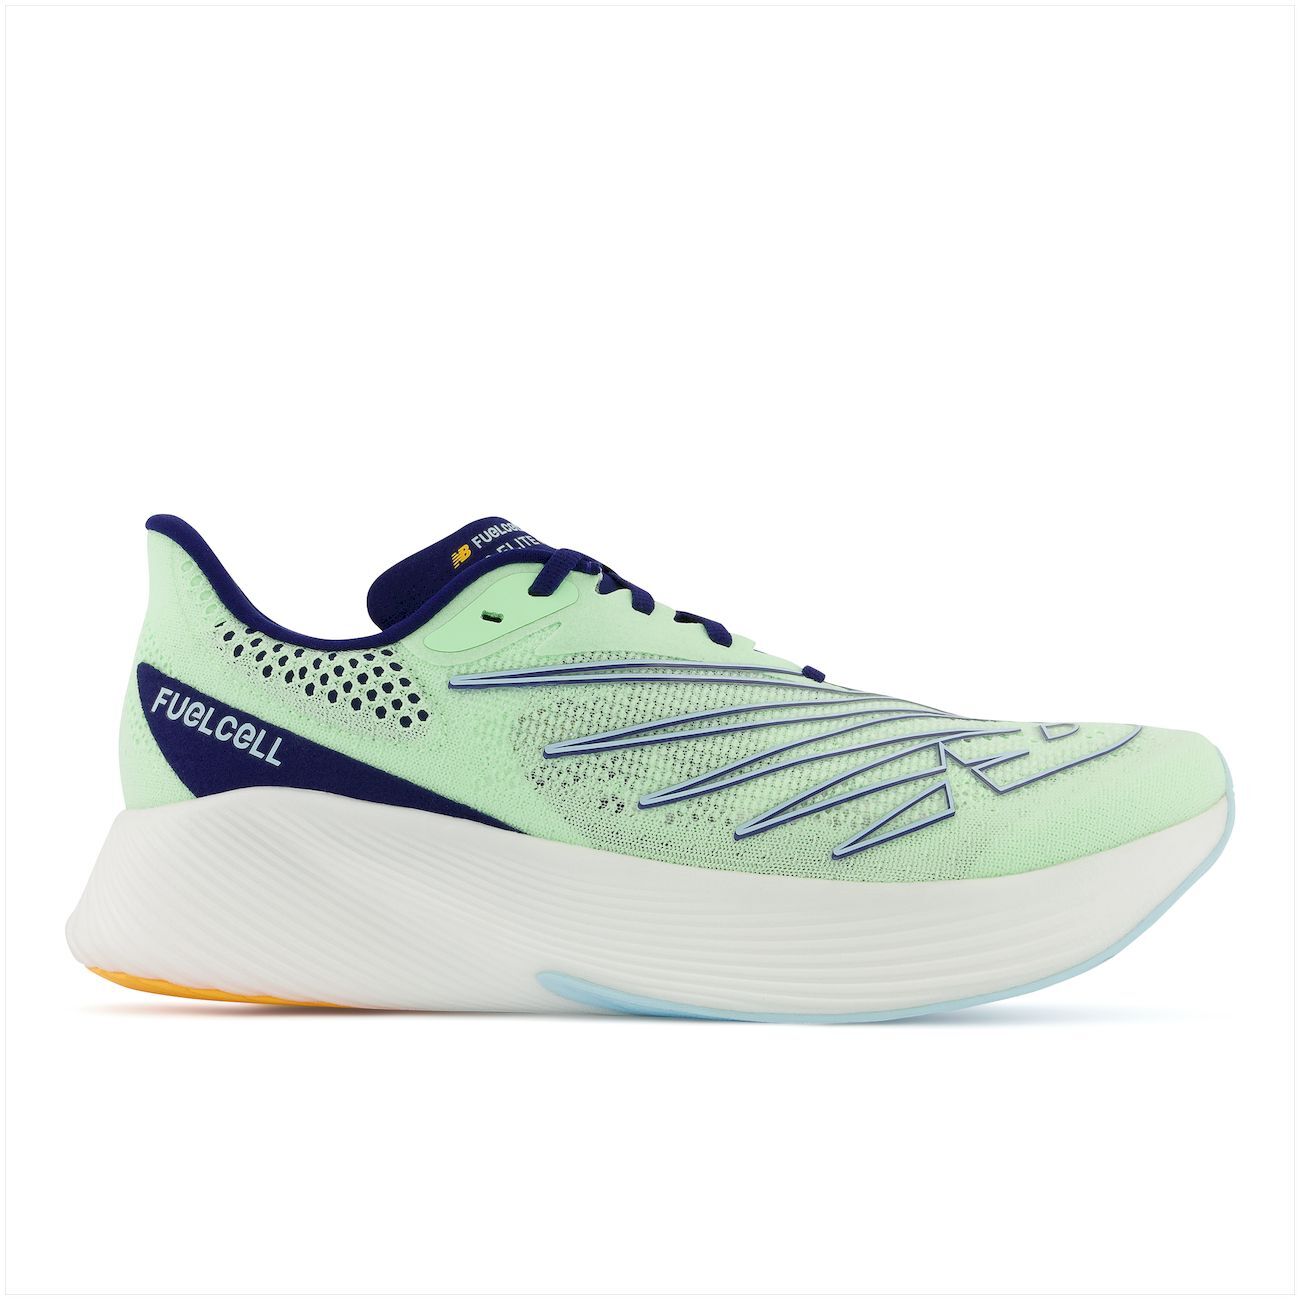 New Balance Fuelcell RC Elite V2 - Buty do biegania meskie | Hardloop